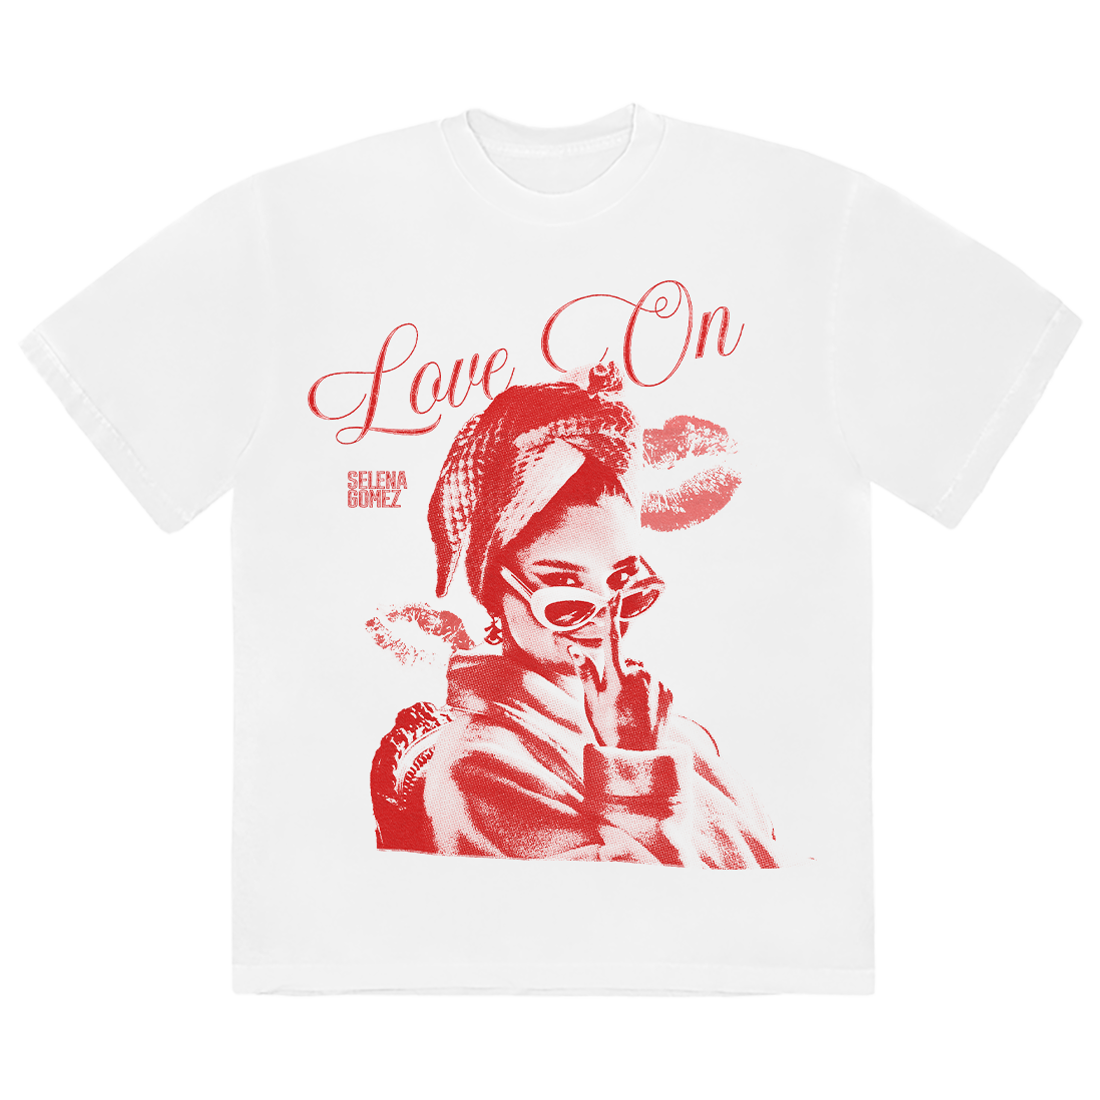 Love On Graphic T-Shirt